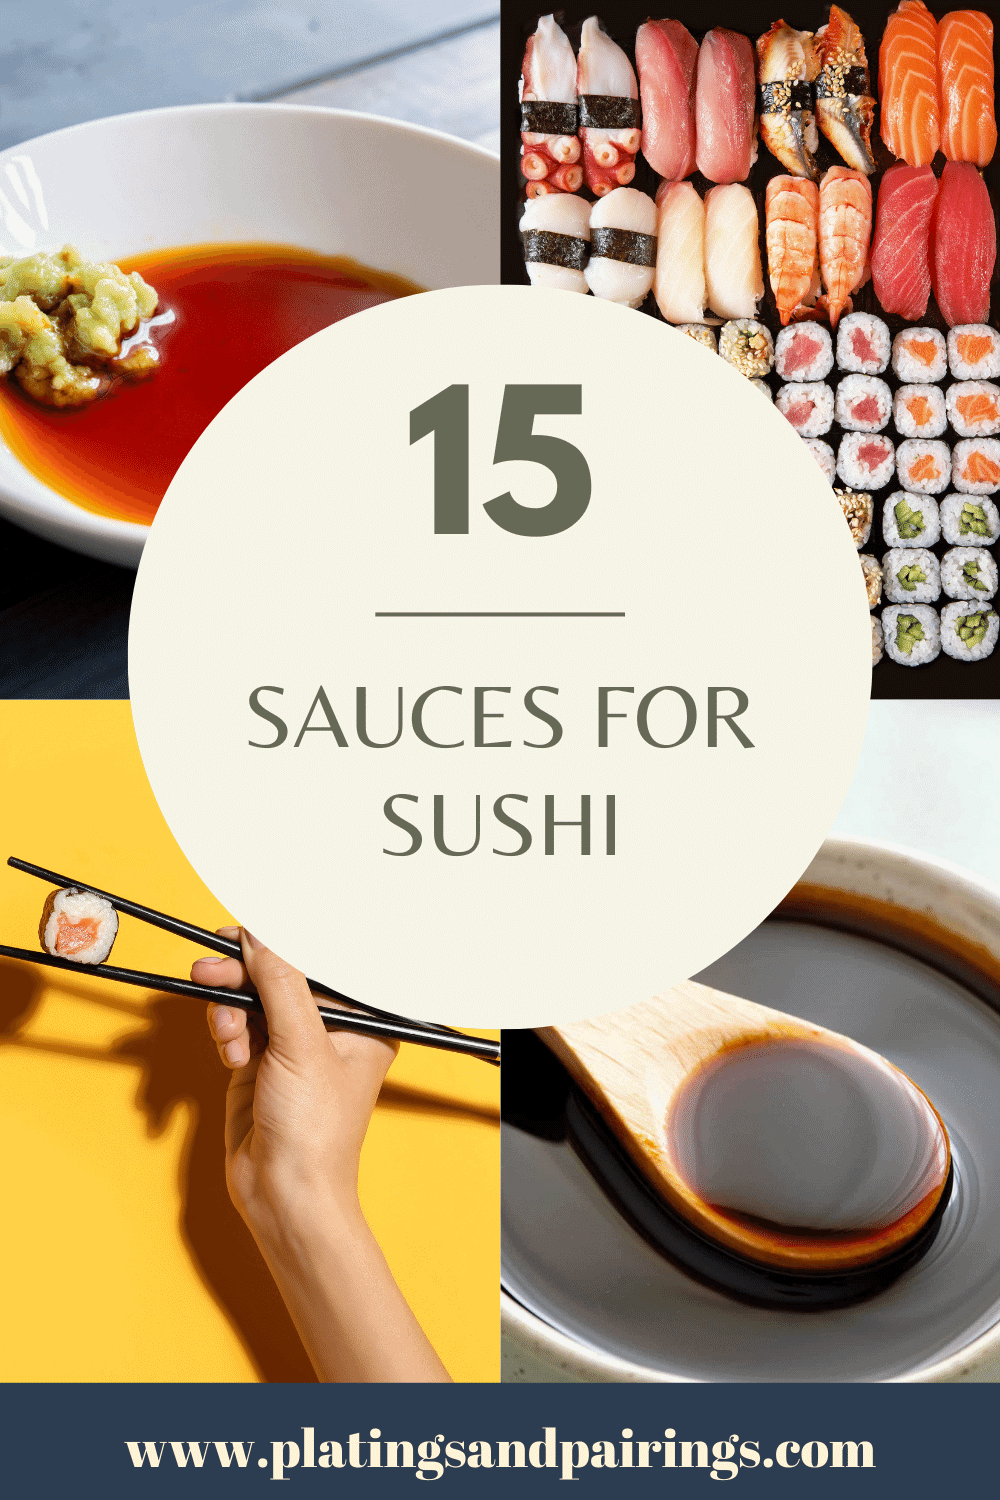 Collage of sushi sauces with text overlay - sauces for sushi.